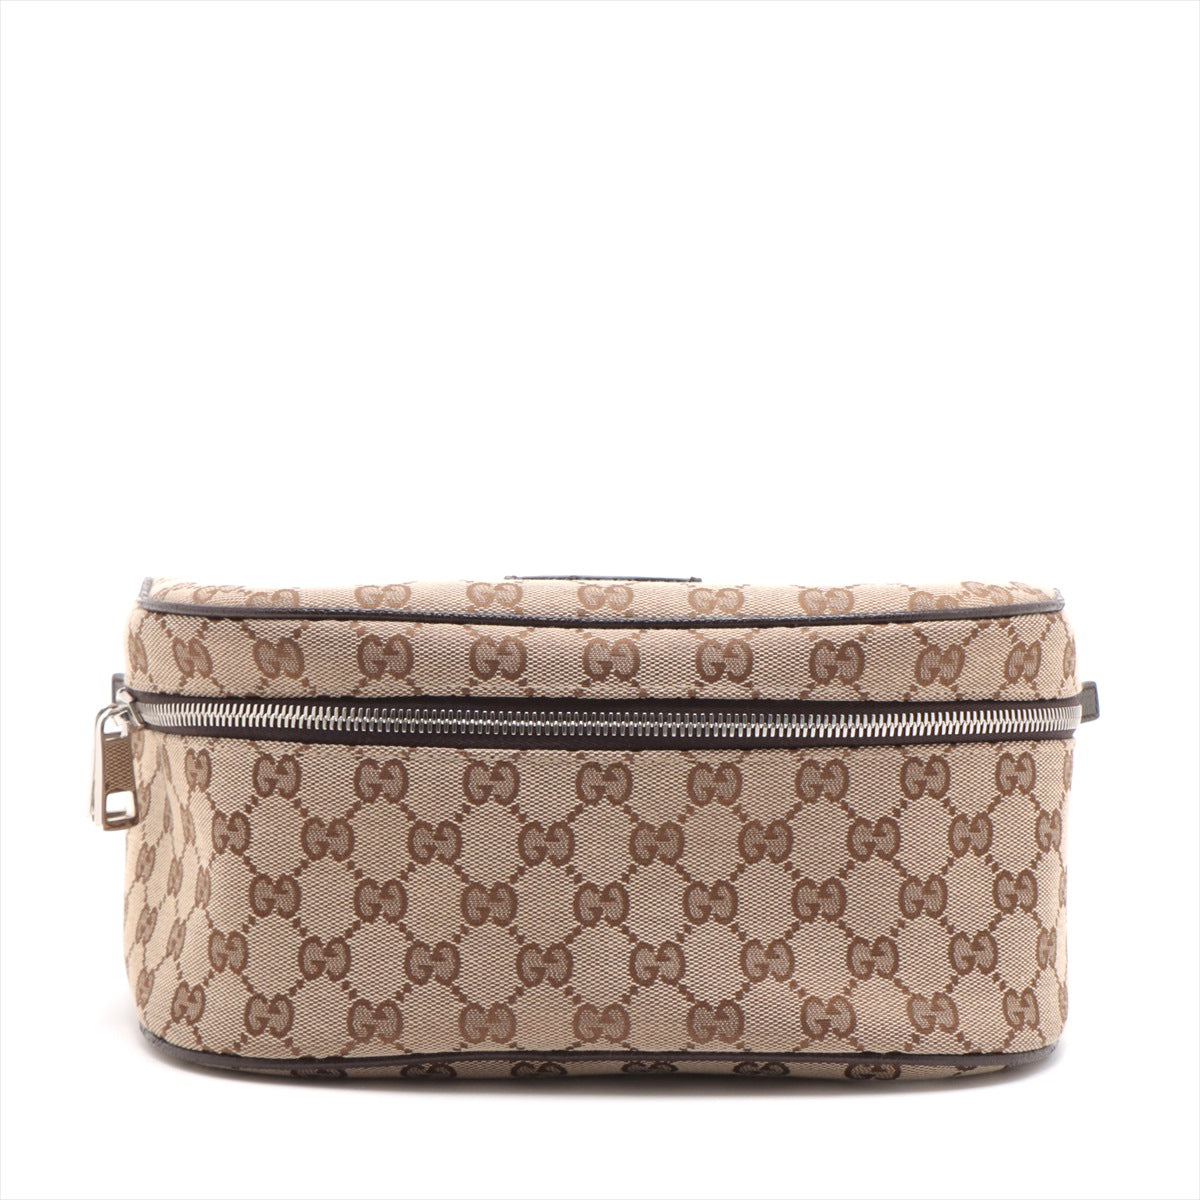 Gucci GG canvas body bag beige 630915 outlet mark